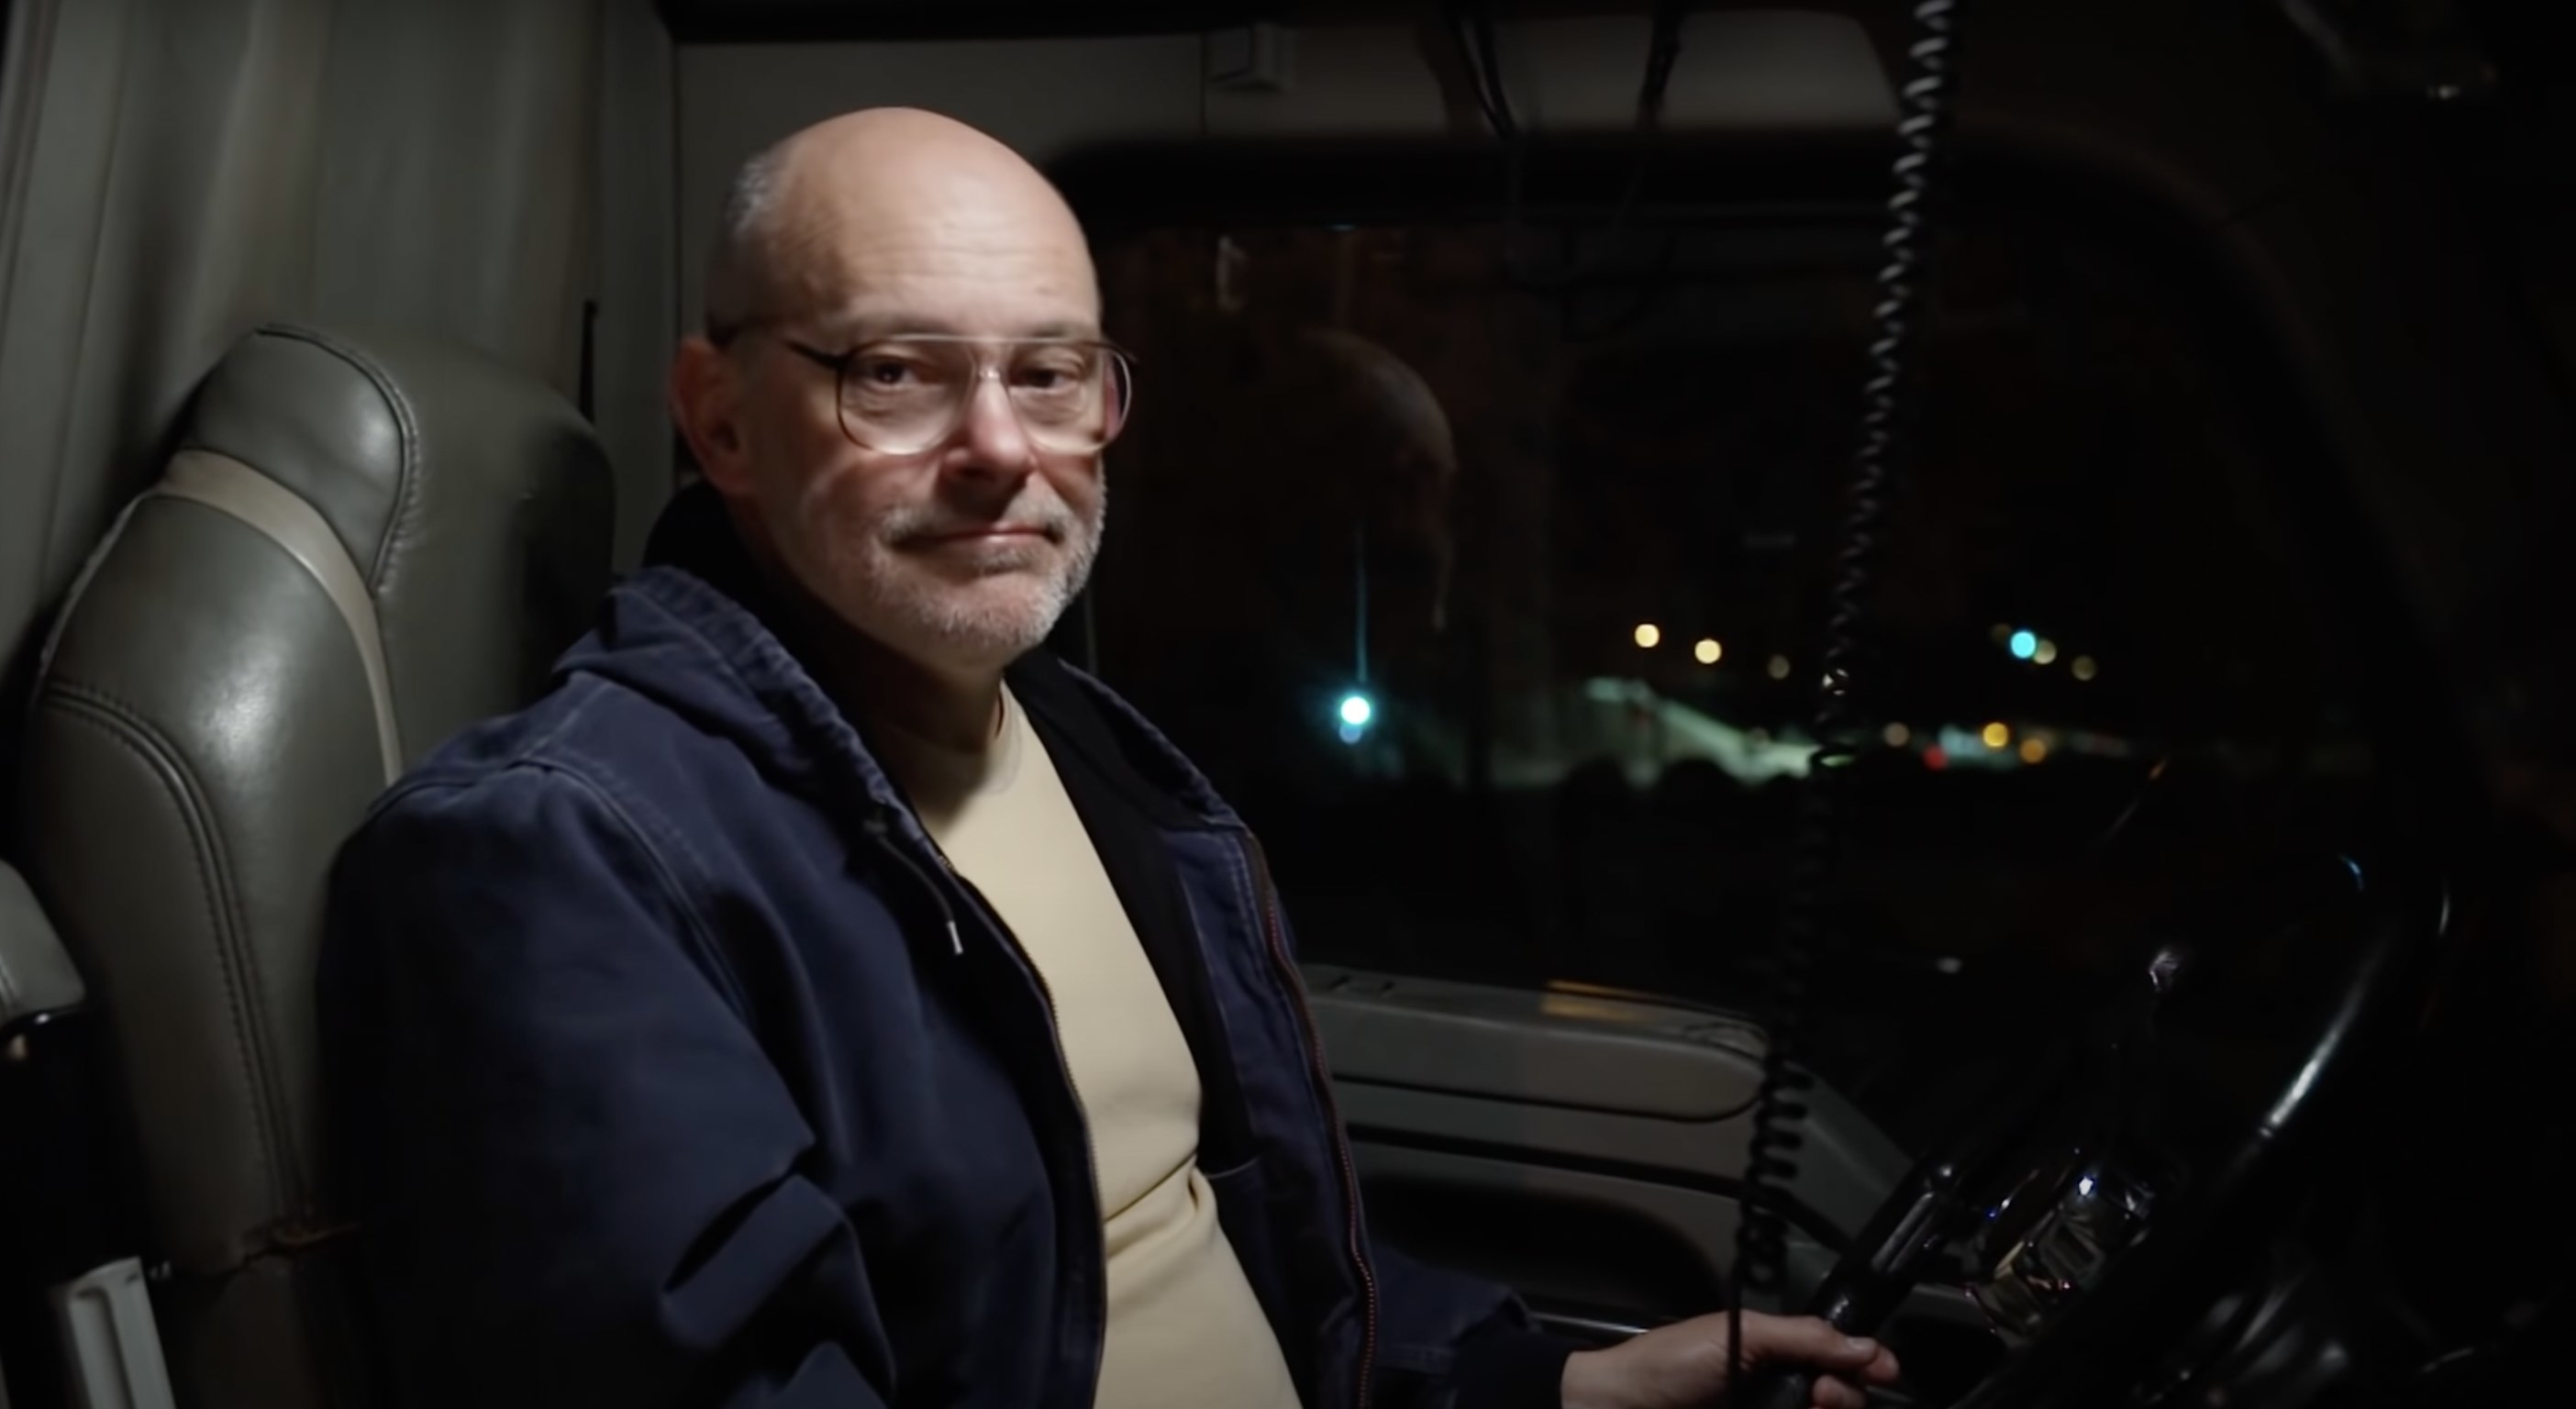 Rob Corddry sitting in a truck, looking at the camera in a small smile